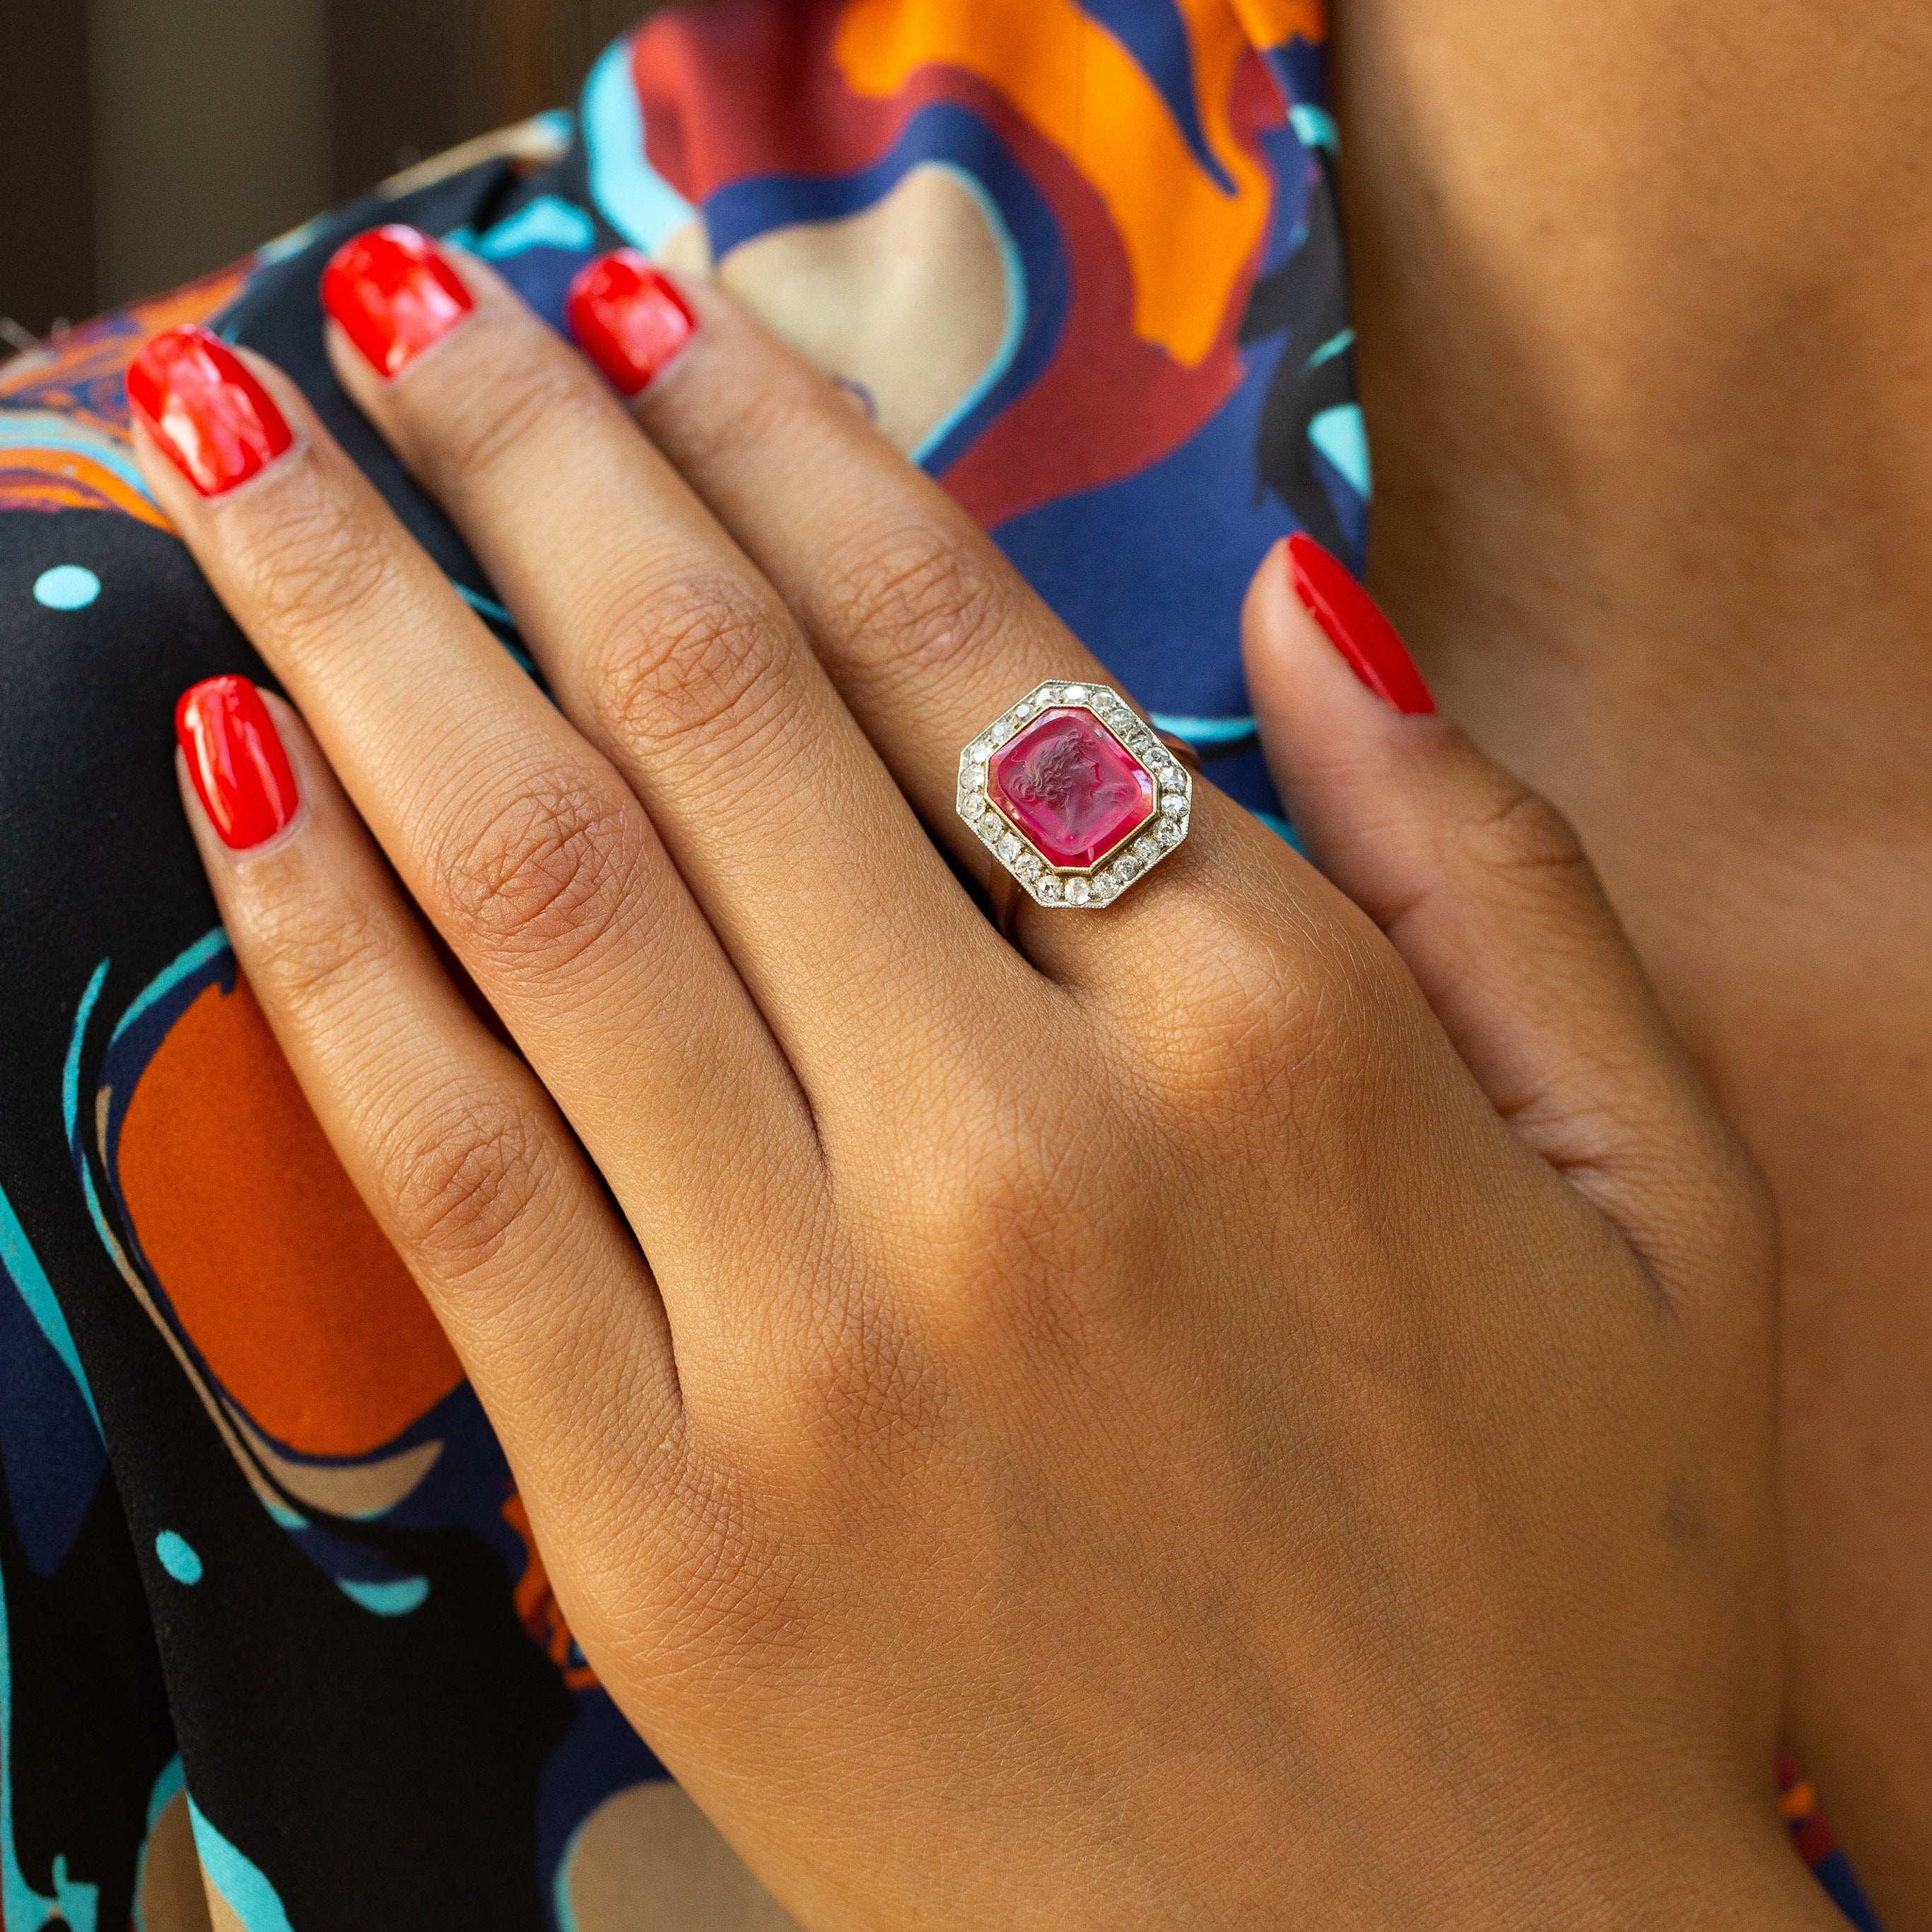 Russian Synthetic Ruby Cameo, Diamond, and 14k Gold Ring